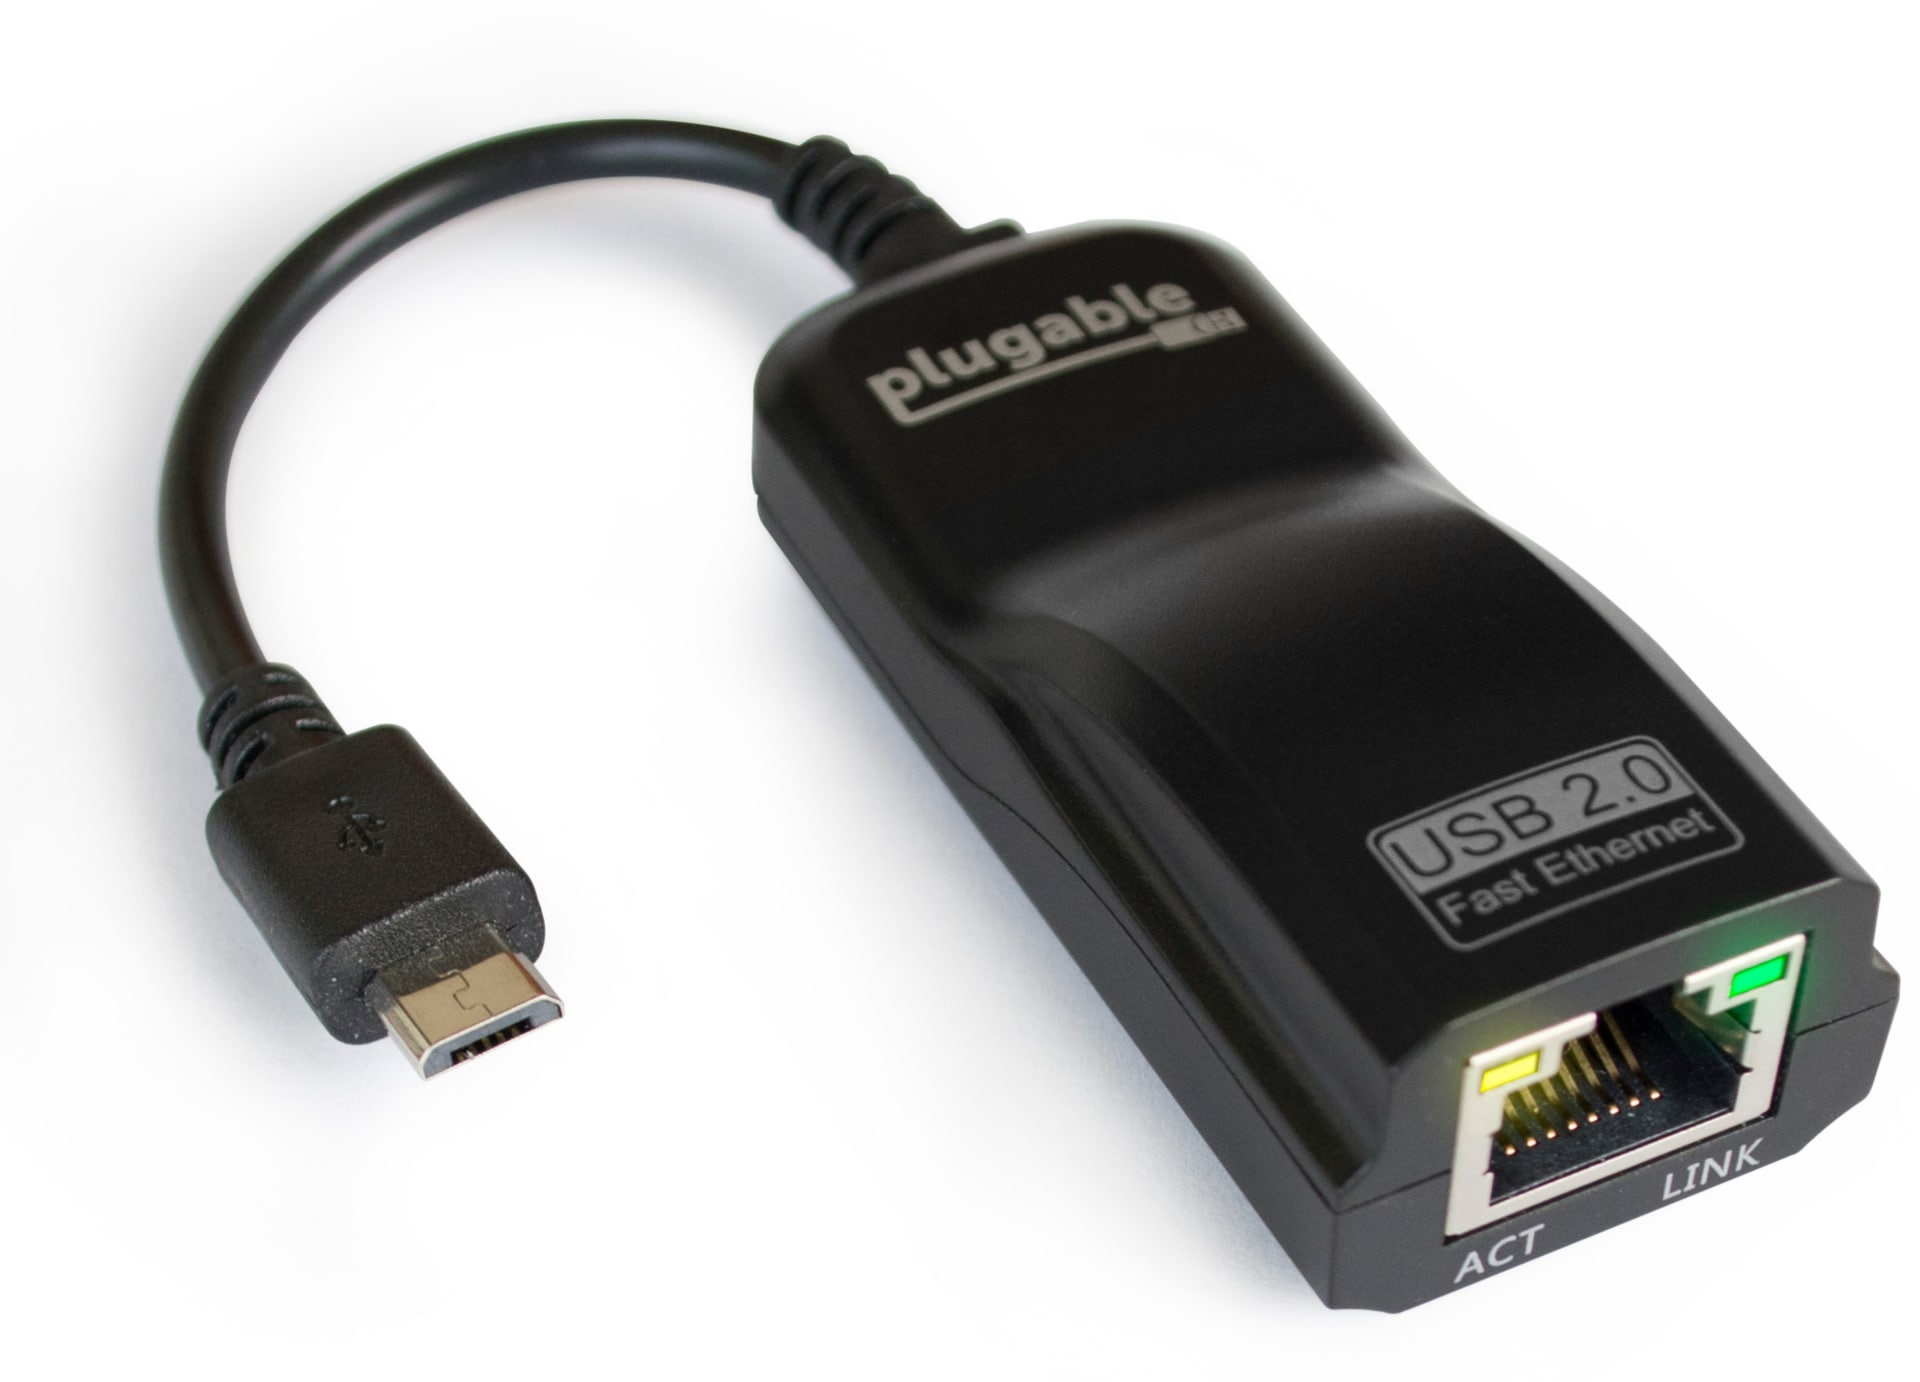 Plugable OTG Network Adapter - USB 20 Micro-B to 10/100 Ethernet